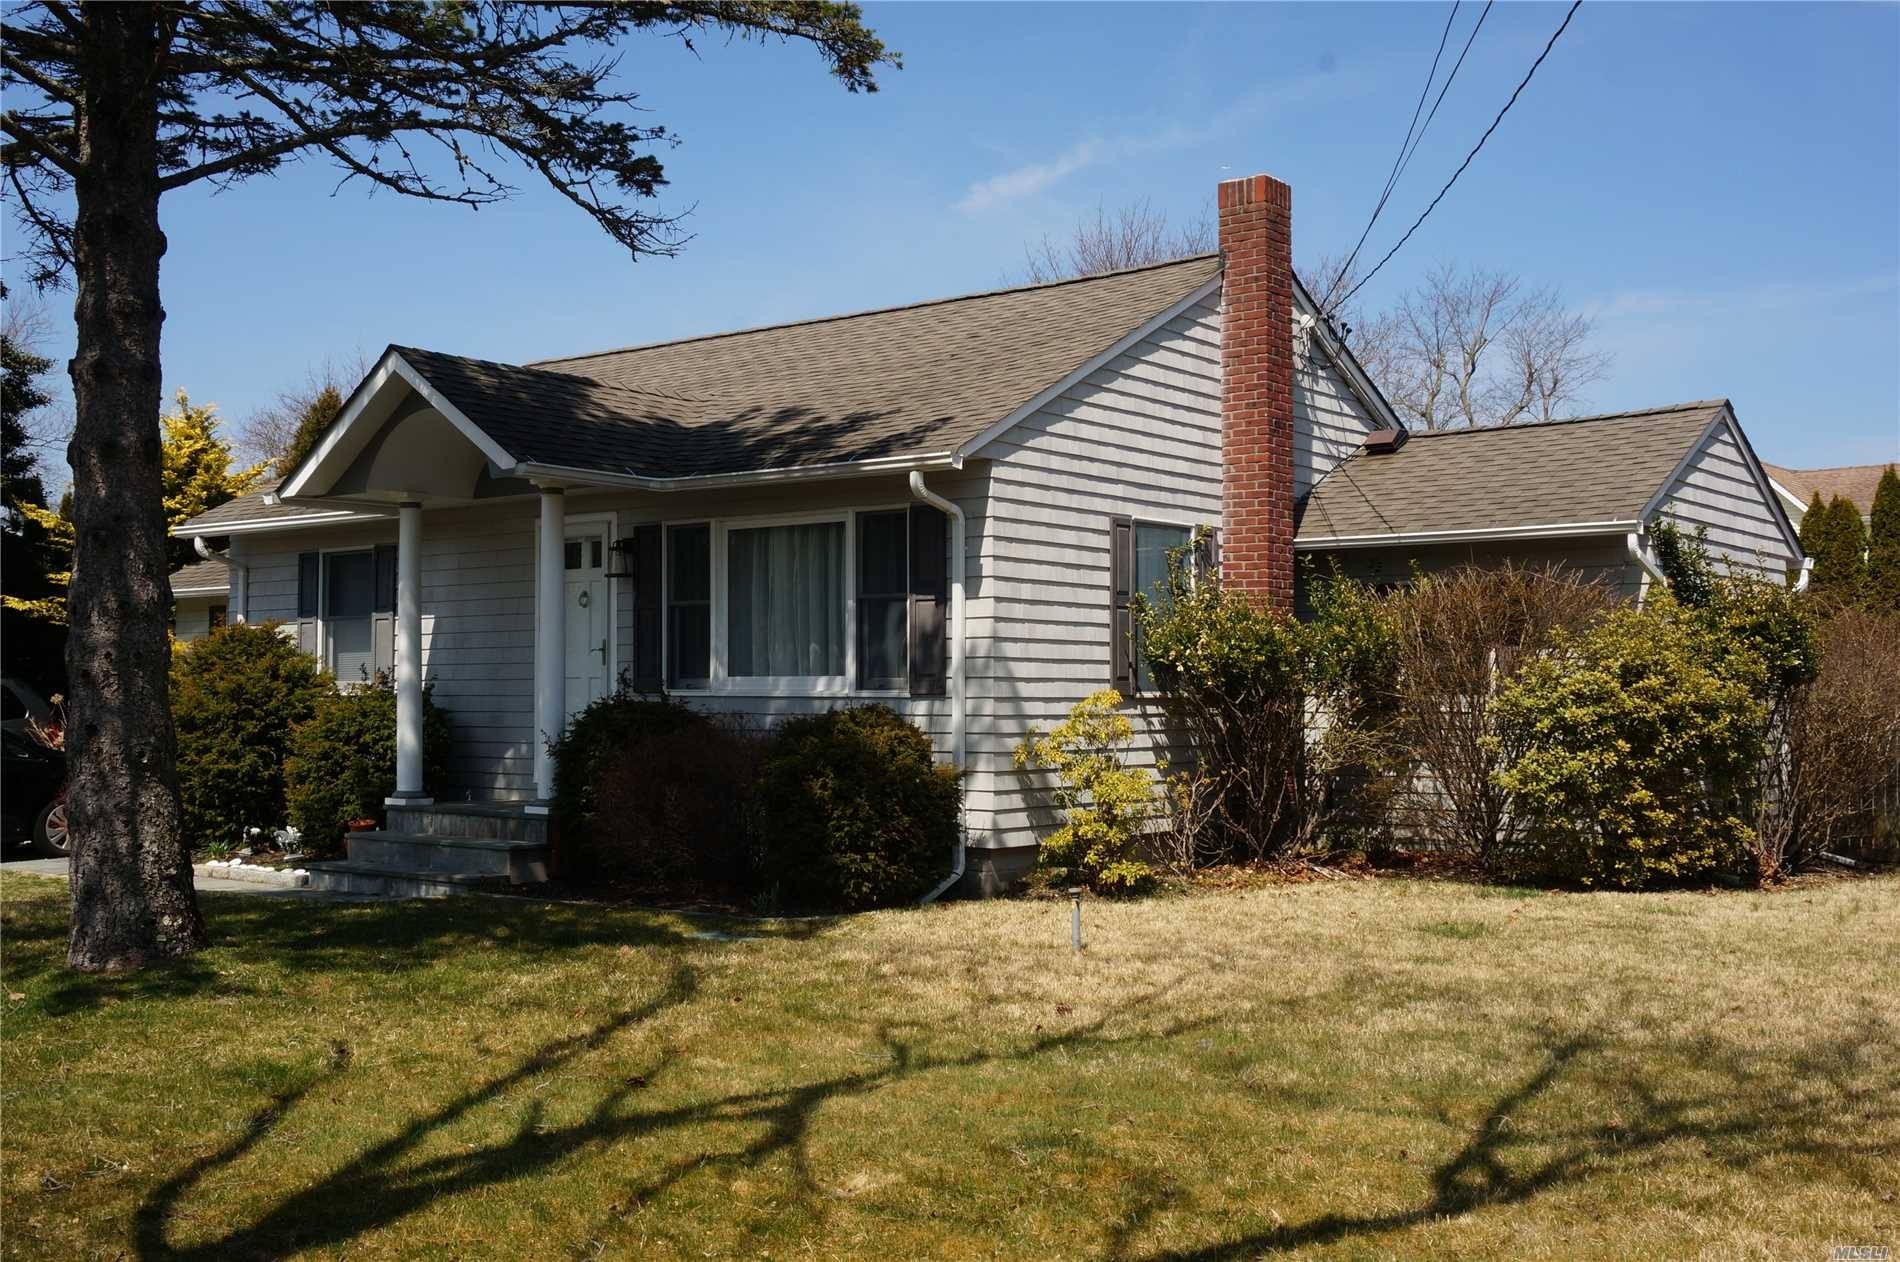 In Hampton point turn key cedar sided home south of highway walk to village restaurants shopping and park, community beach and boat slips, home had complete renovation approximately 2006 hardwood ...